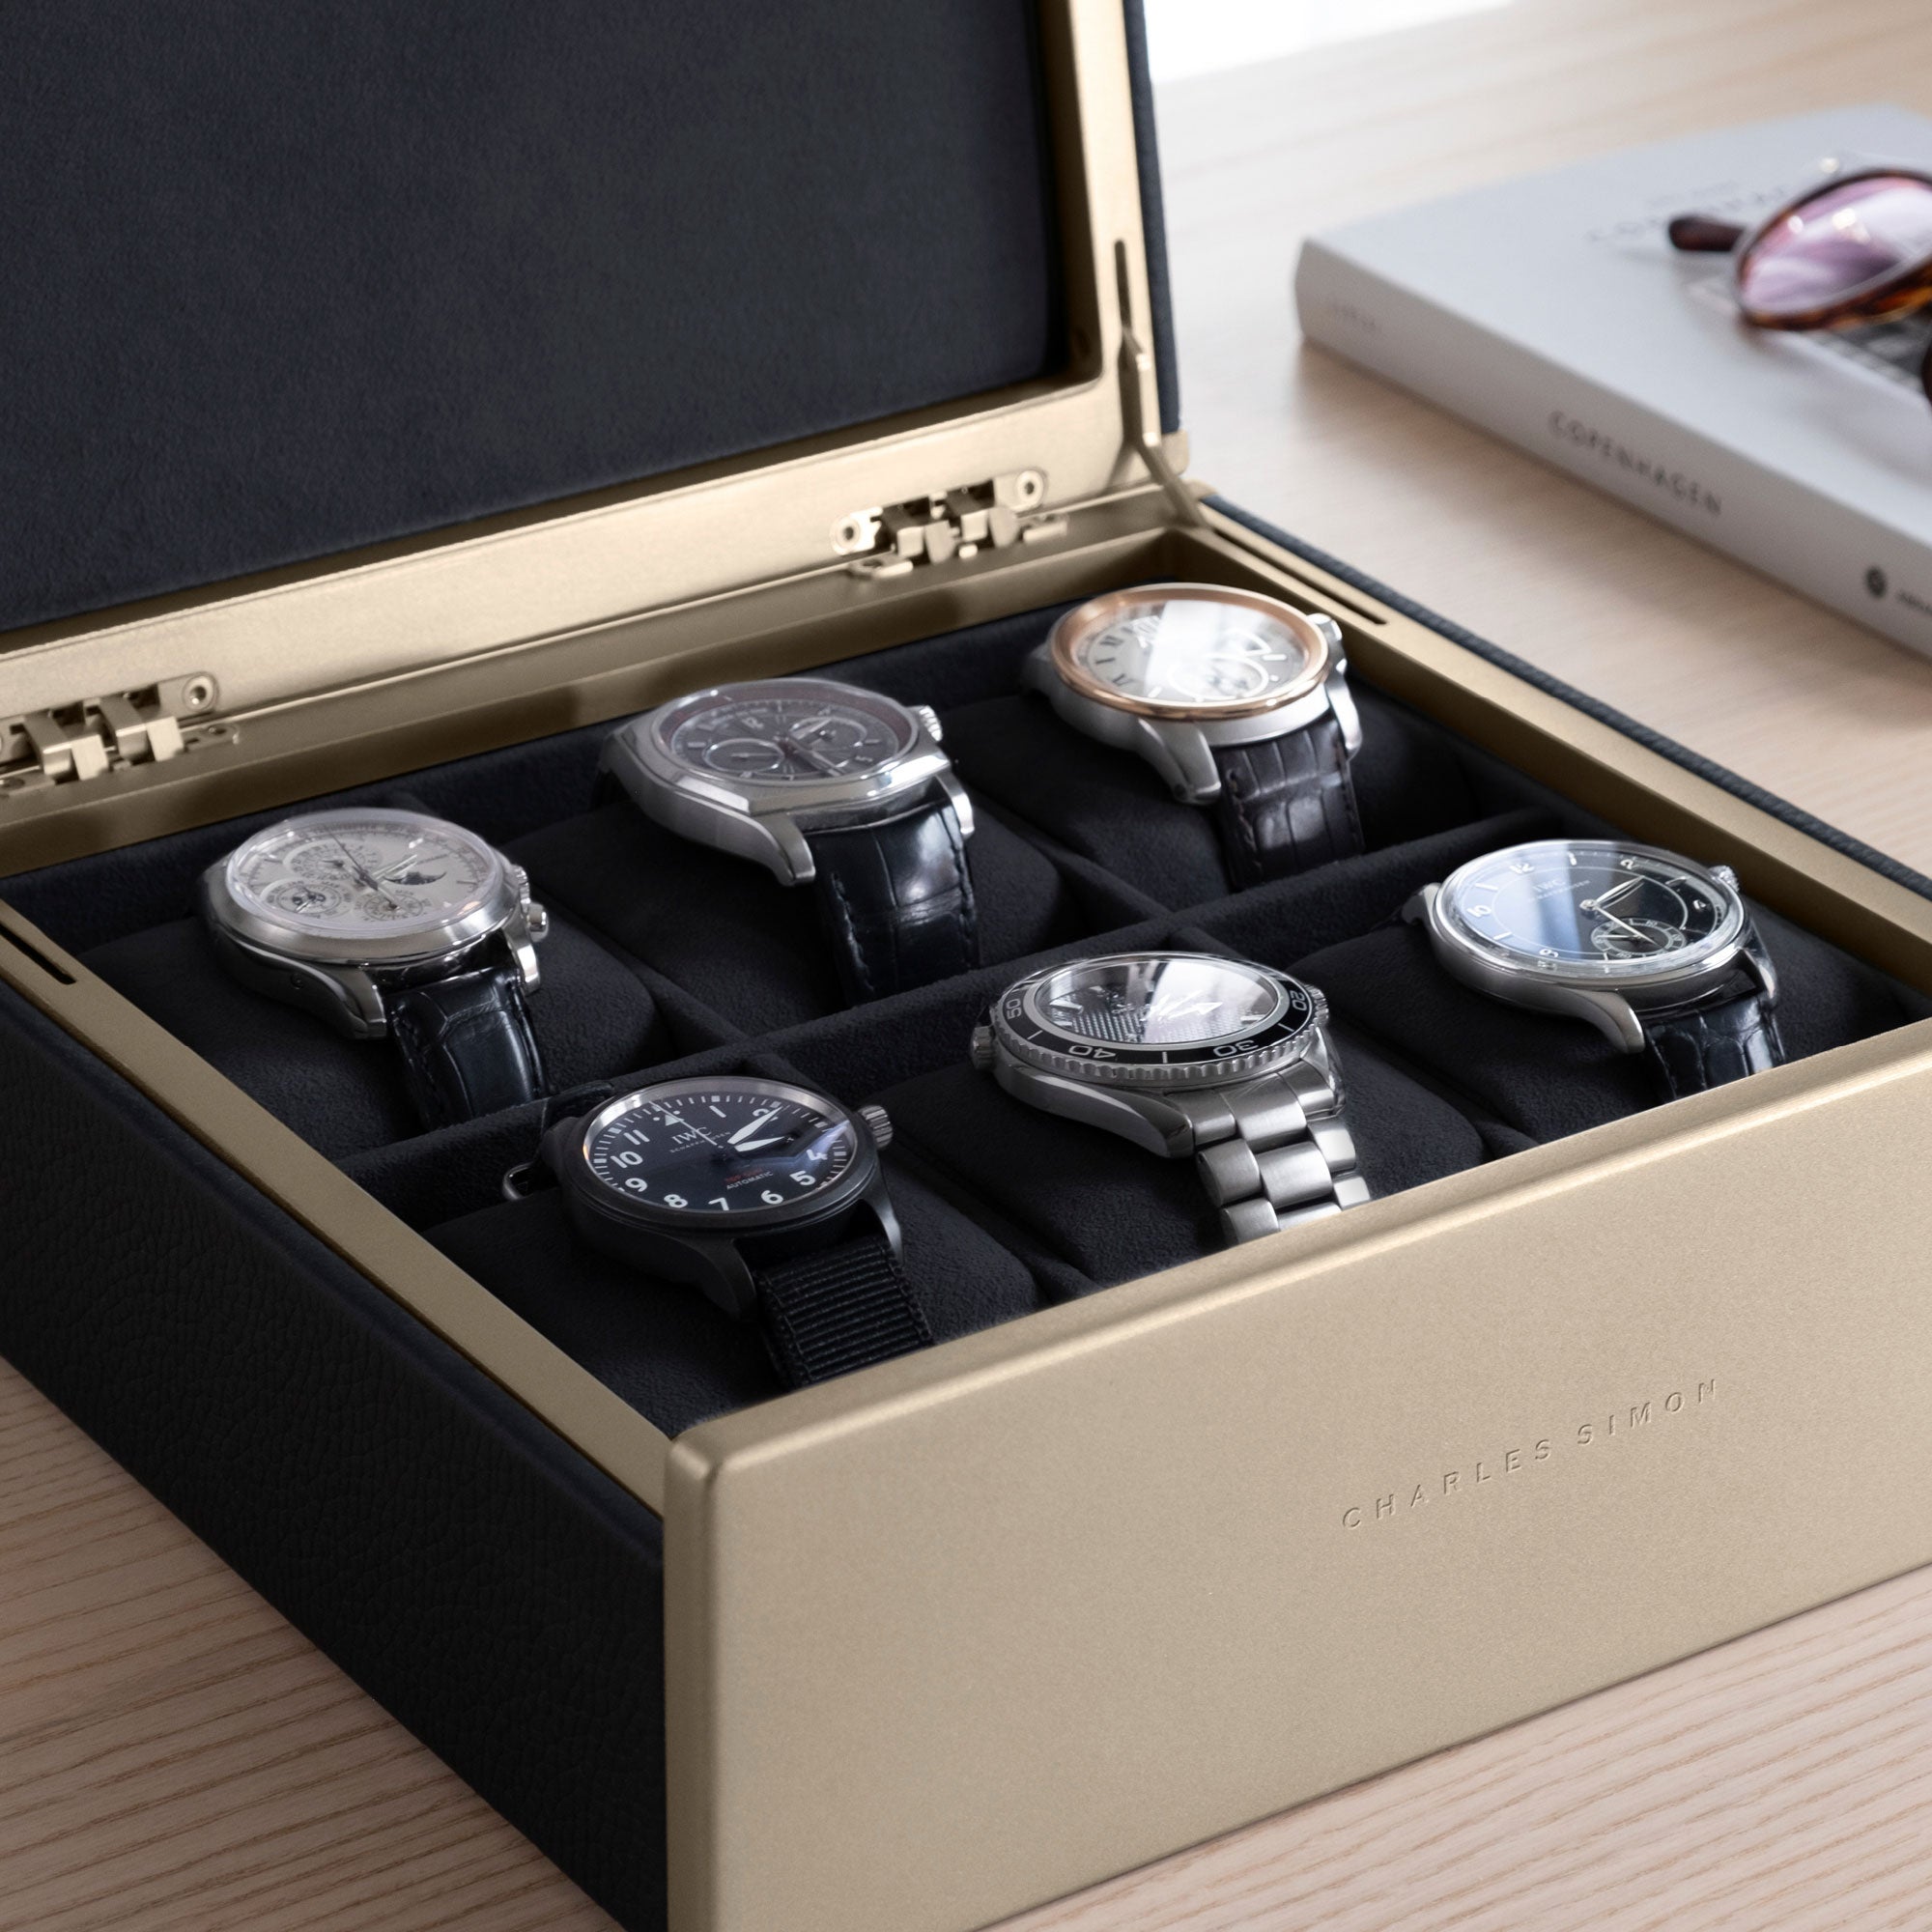 Detail photo of watch collection of 6 watches displayed in the gold Spence 6 watch box in black leather. 